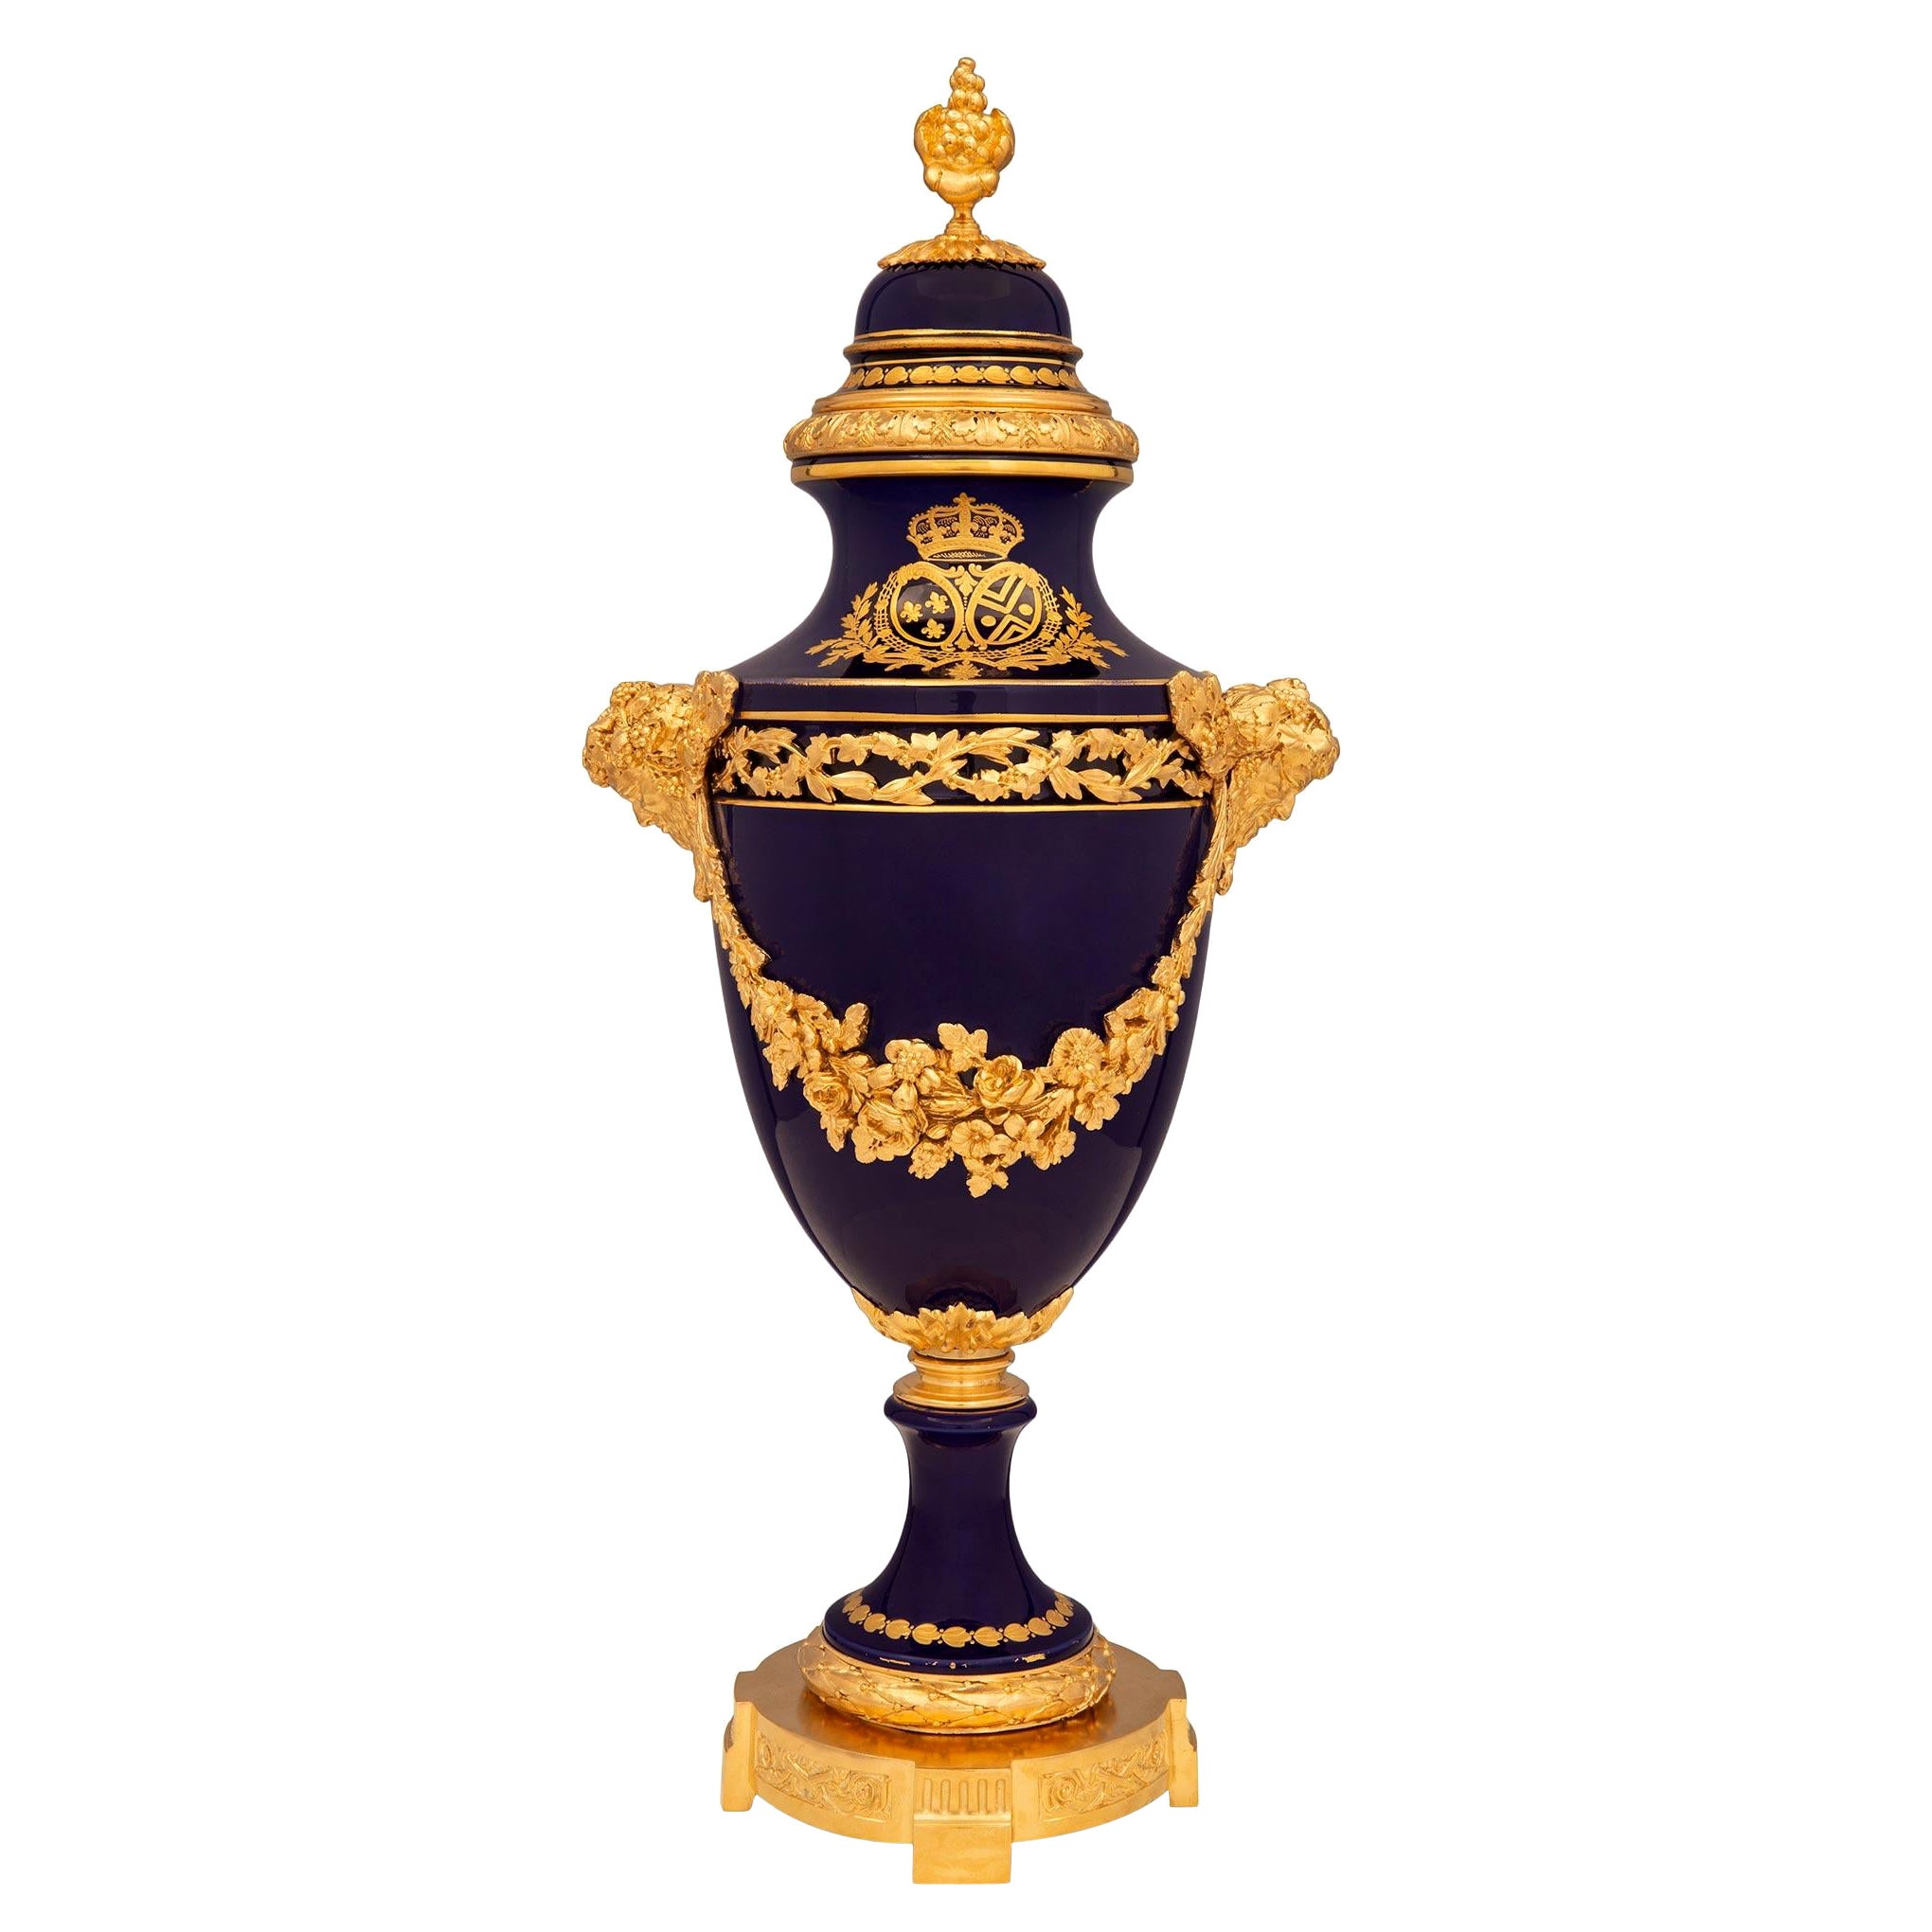 French 19th Century Louis XVI St. Sèvres Porcelain and Ormolu Lidded Urn